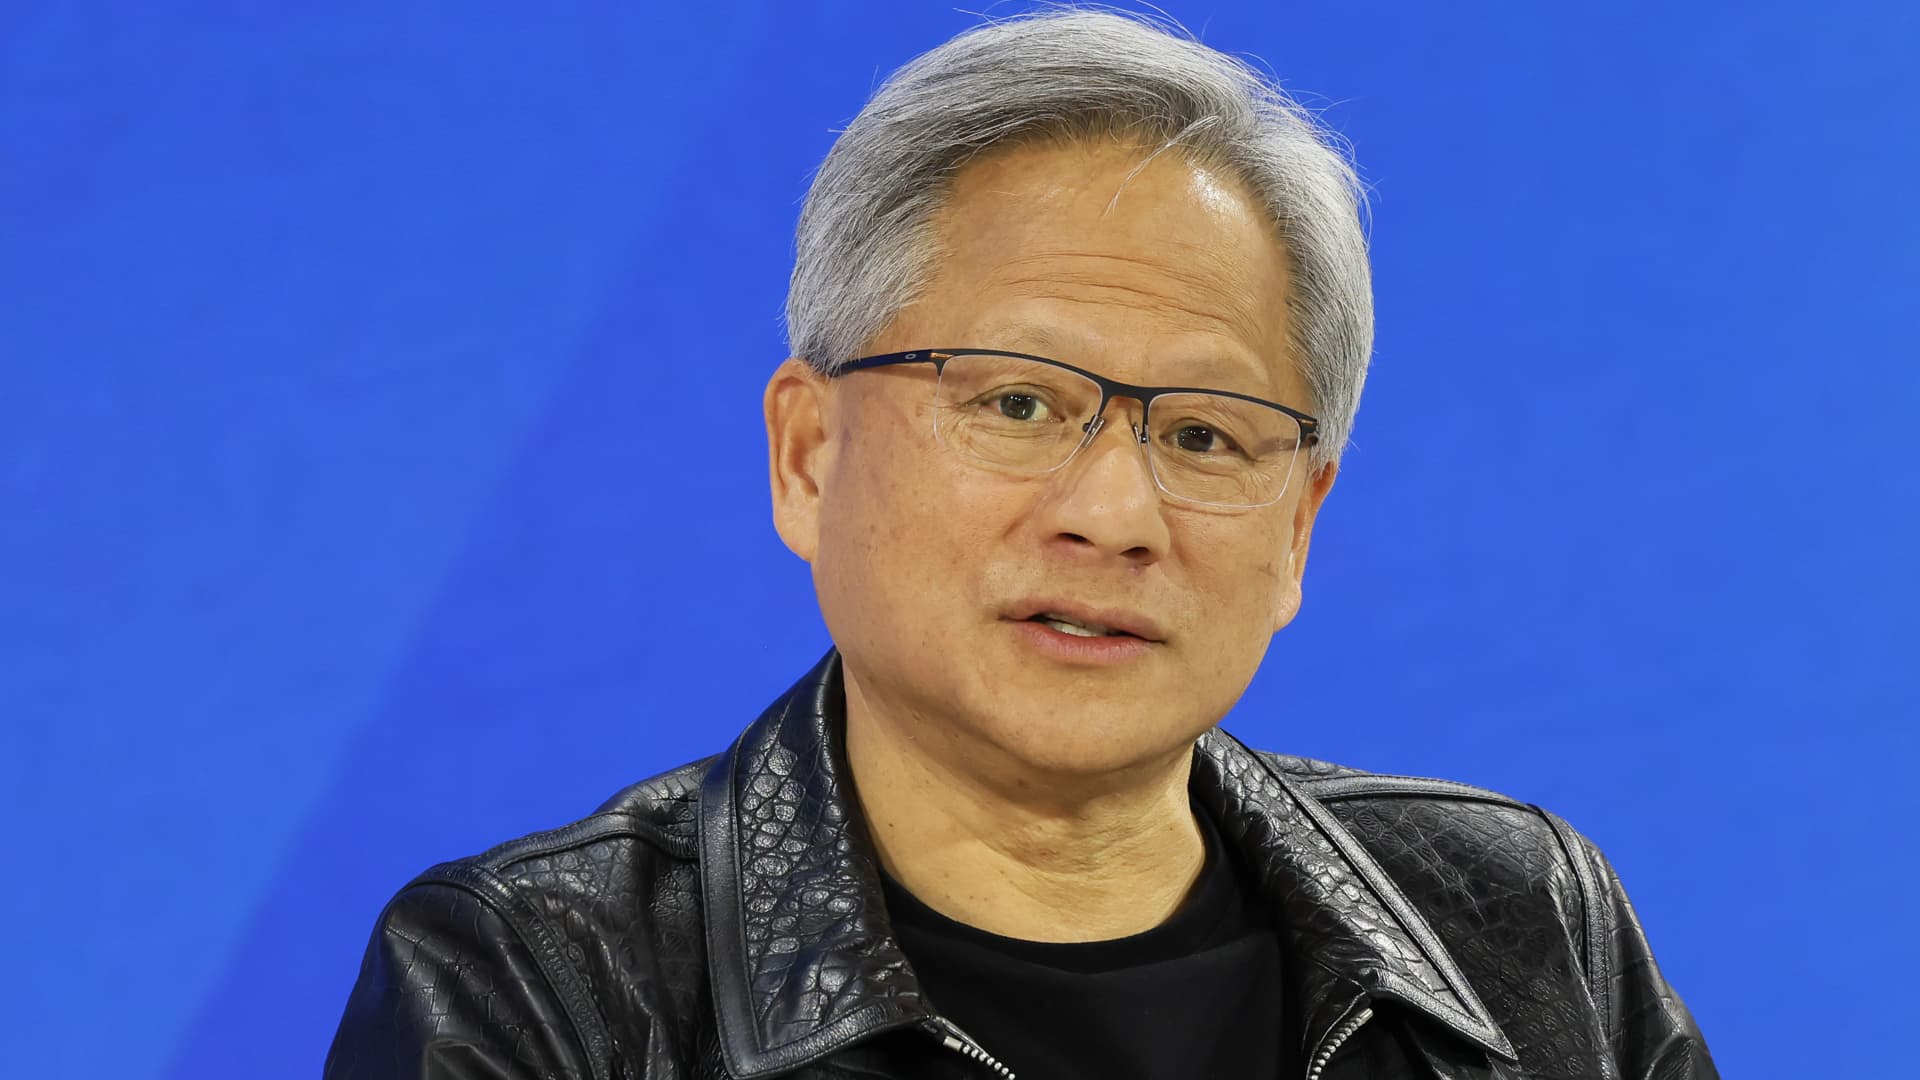 Nvidia CEO Jensen Huang says AI will be 'fairly competitive' with humans in 5 years